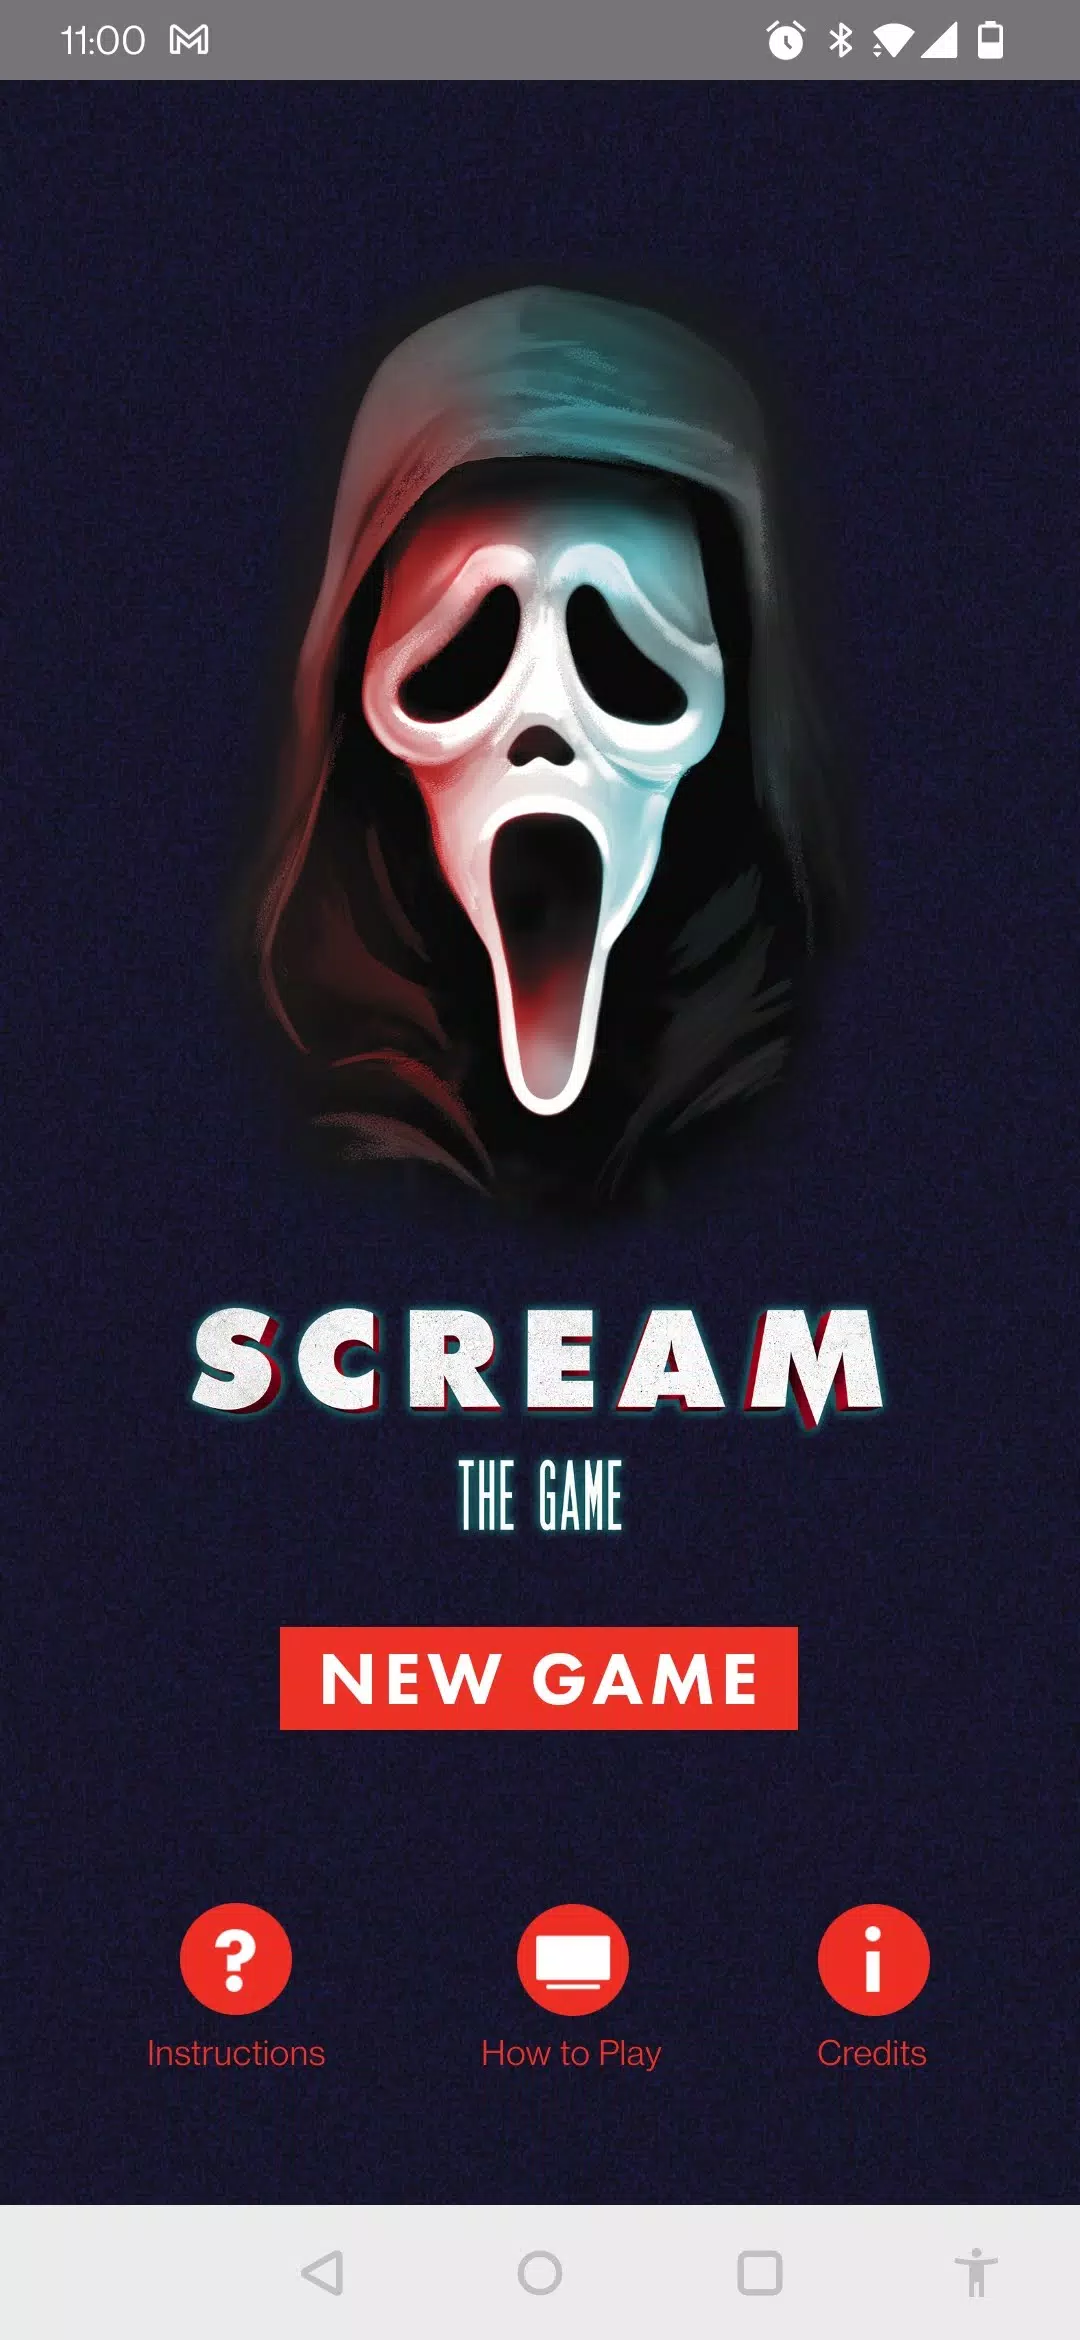 The man scream from the window APK Download - Android Simulation Games